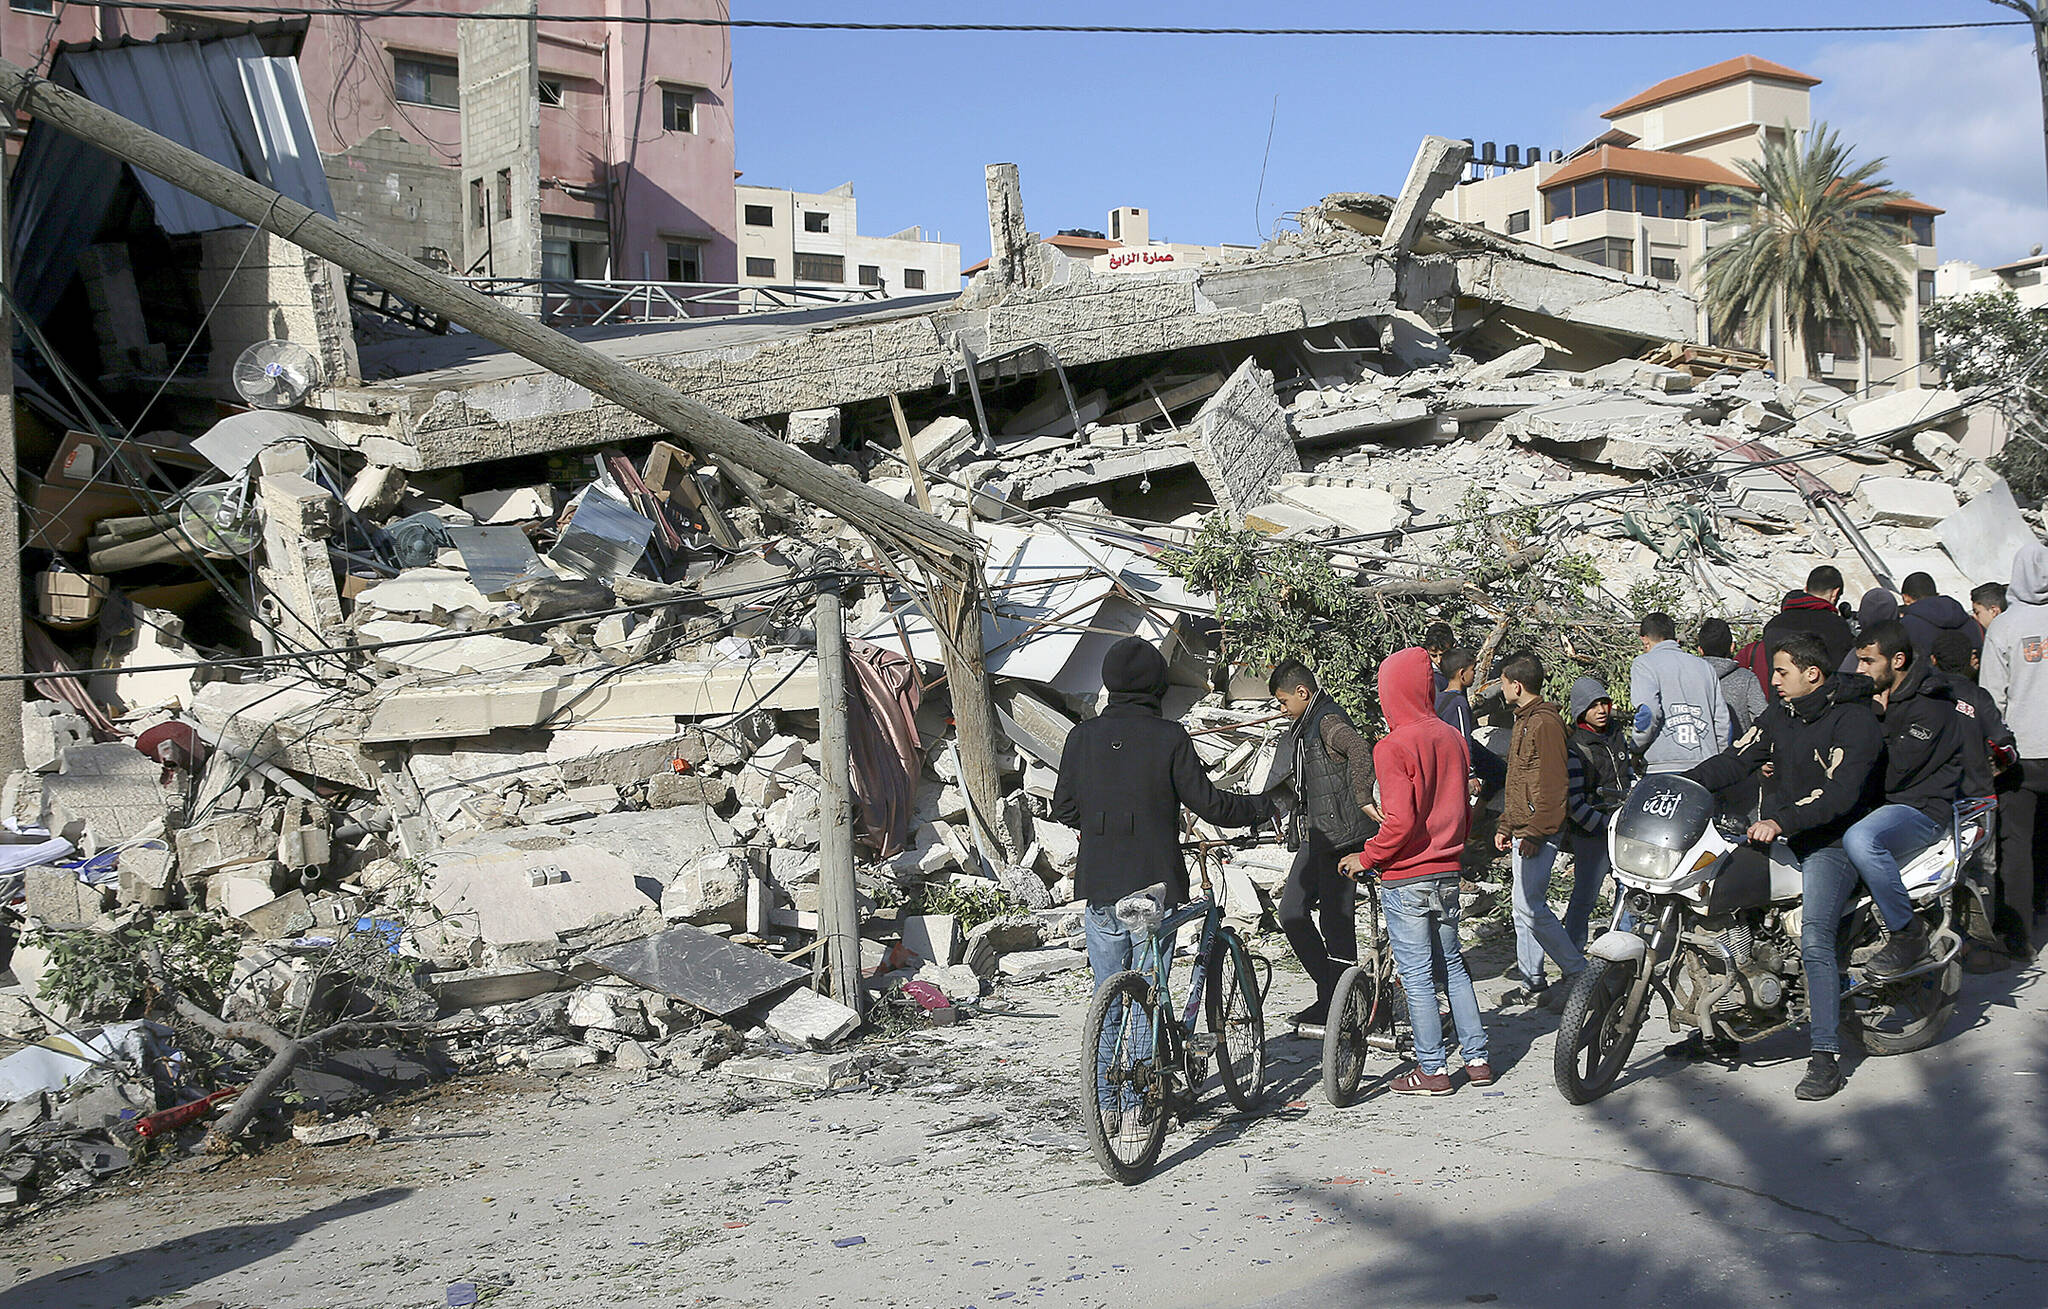 Residents inspect the damage of the destroyed multi-story building of Hamas-affiliated insurance company, in Gaza City, Tuesday, March 26, 2019. A tense quiet took hold Tuesday morning after a night of heavy fire as Israeli aircraft bombed targets across the Gaza Strip and Gaza militants fired rockets into Israel in what threatened to devolve into a major conflict two weeks before the Israeli election. (AP Photo/Adel Hana)